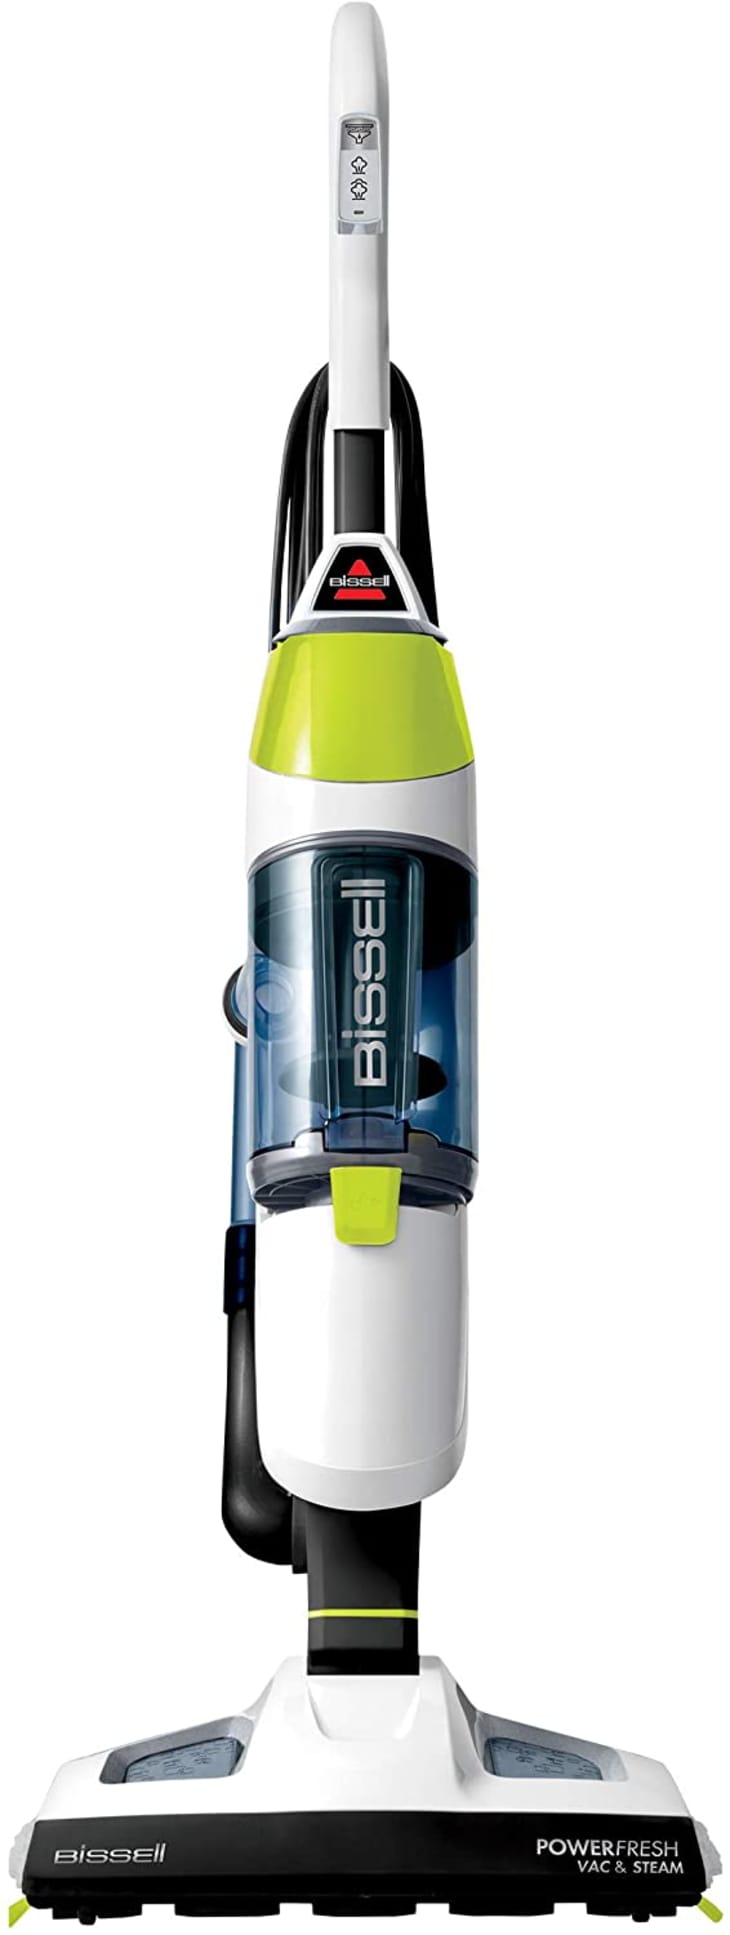 Product Image: Bissell PowerFresh All-in-One Vacuum and Steam Mop